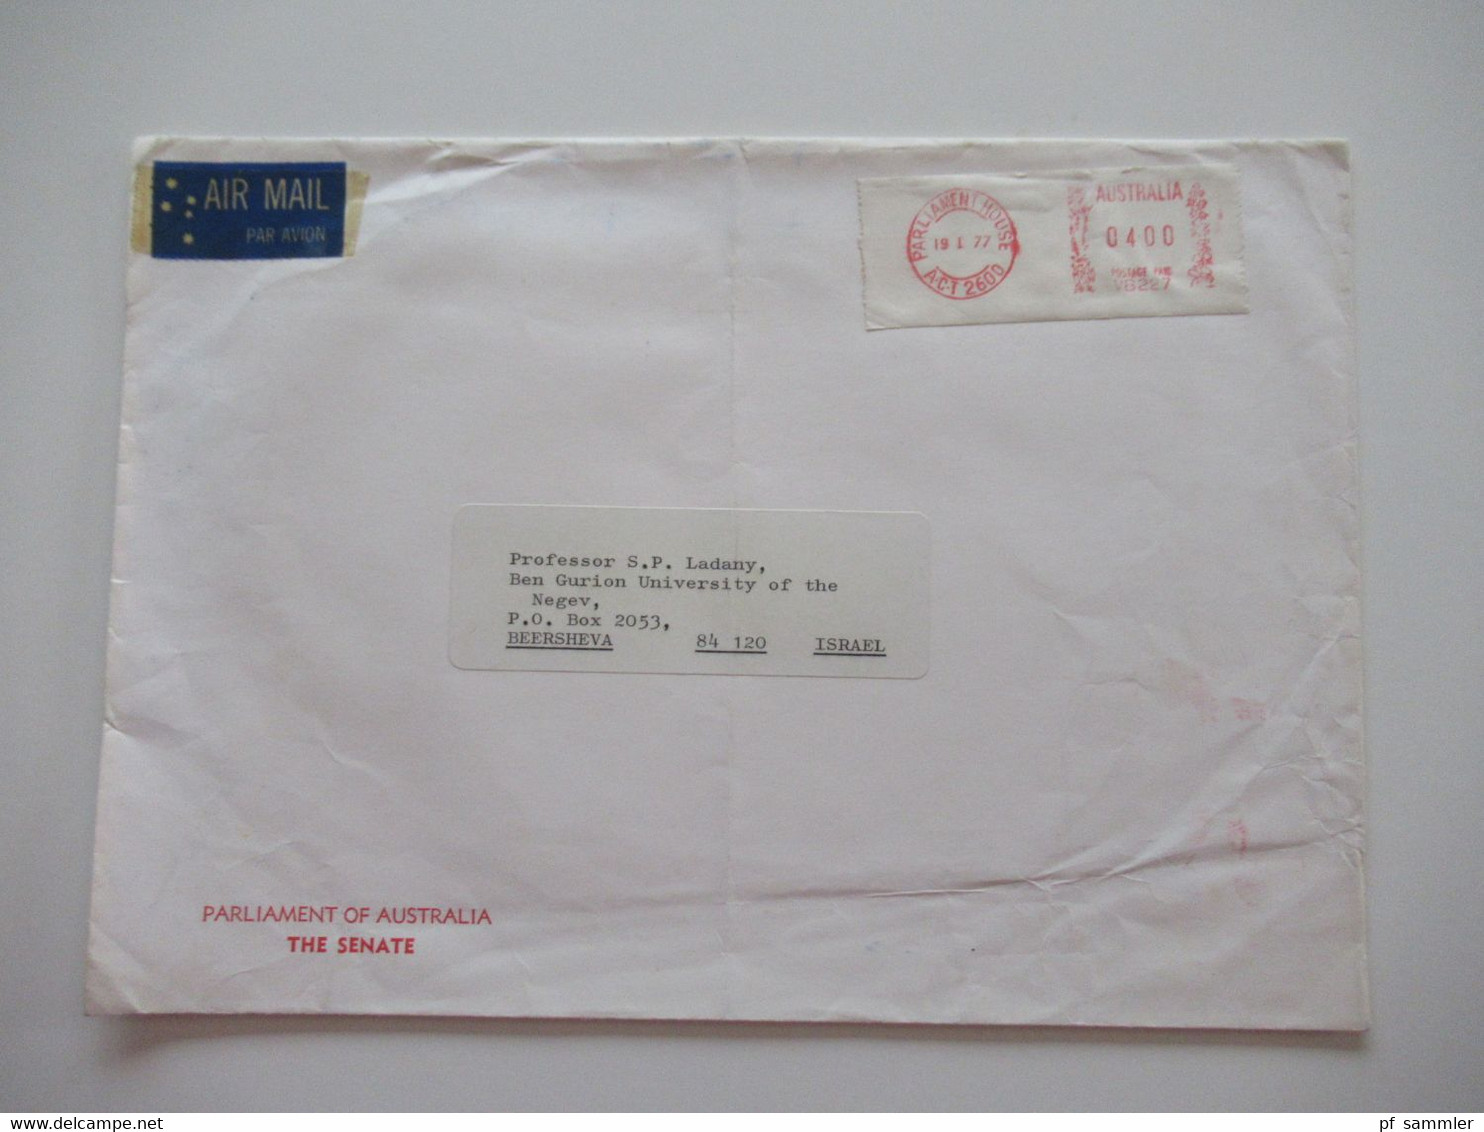 Australien 1977 Air Mail Nach Israel Umschlag Parliament Of Australia The Senate Postage Paid Parliament House ACT 2600 - Covers & Documents